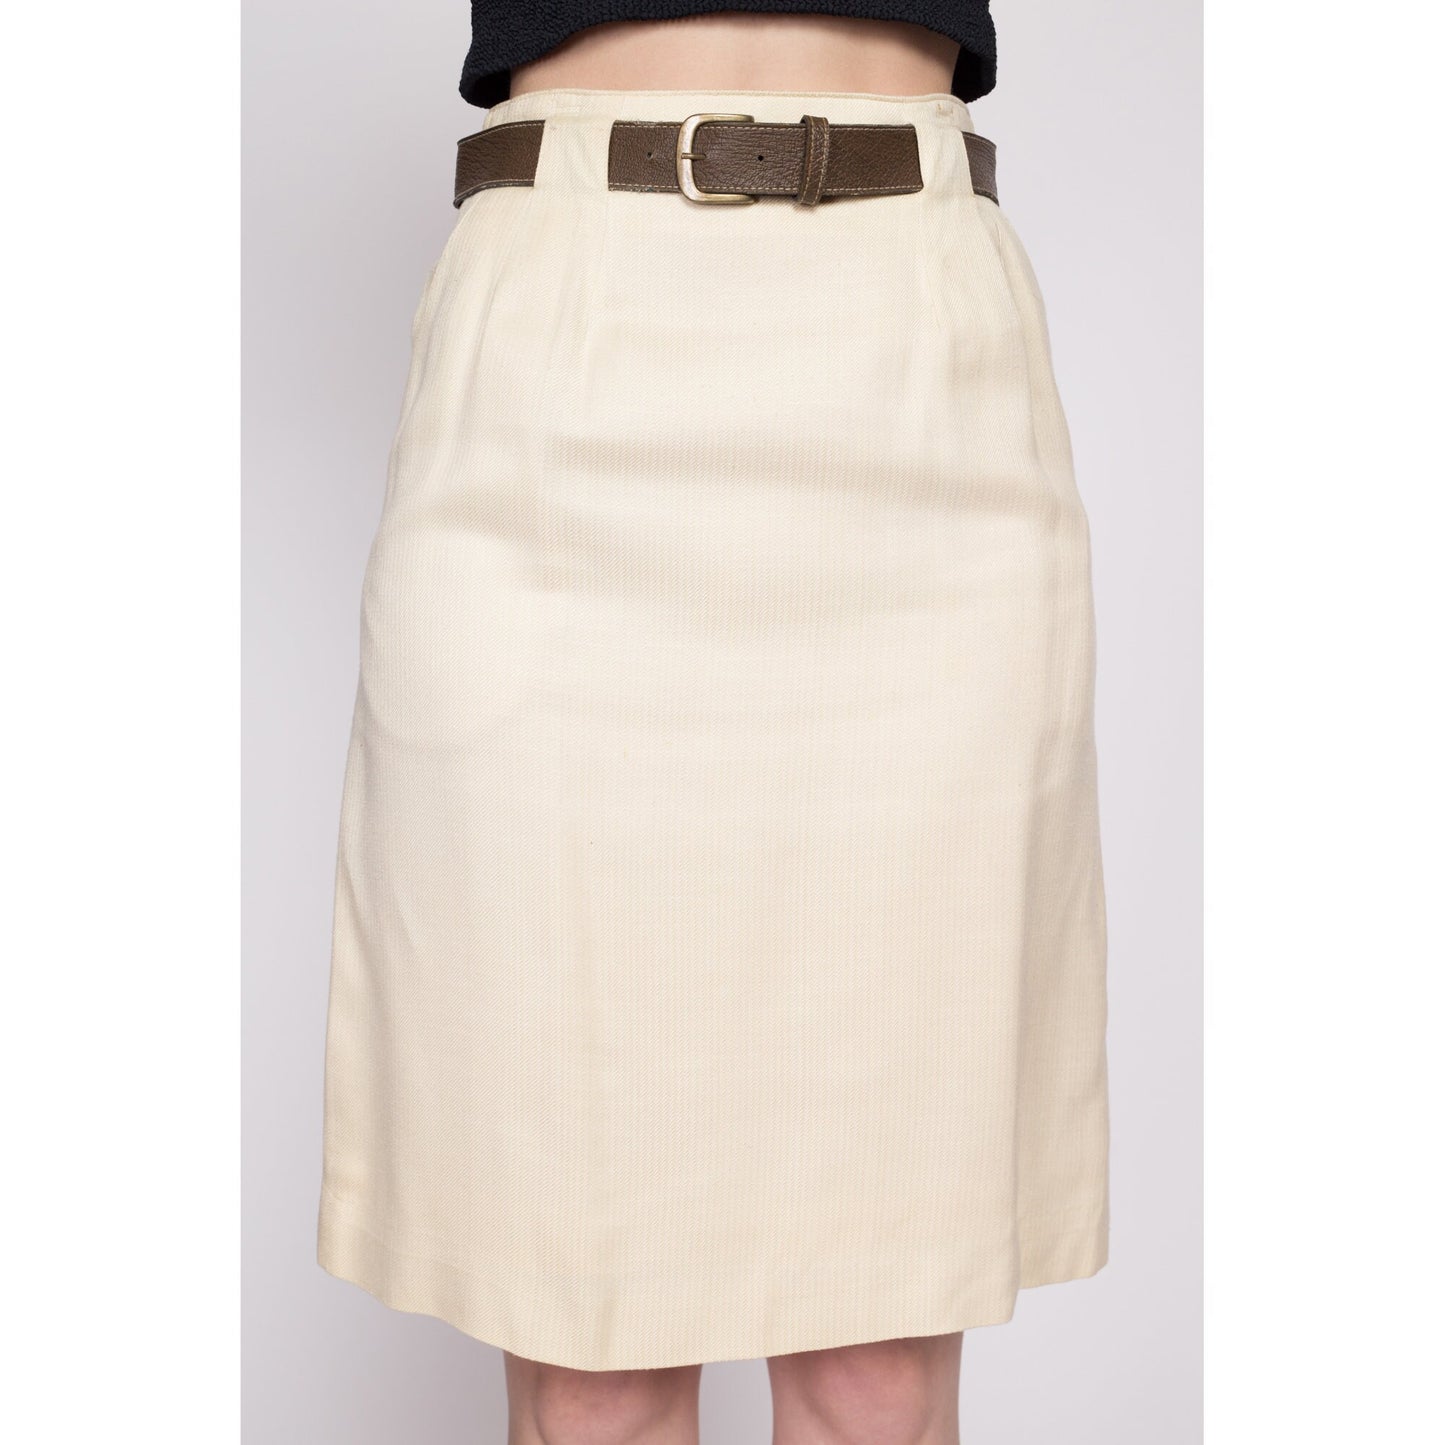 70s 80s Evan Picone Belted Skirt - Extra Small, 24.5" | Vintage Cream Secretary A Line Mini Skirt